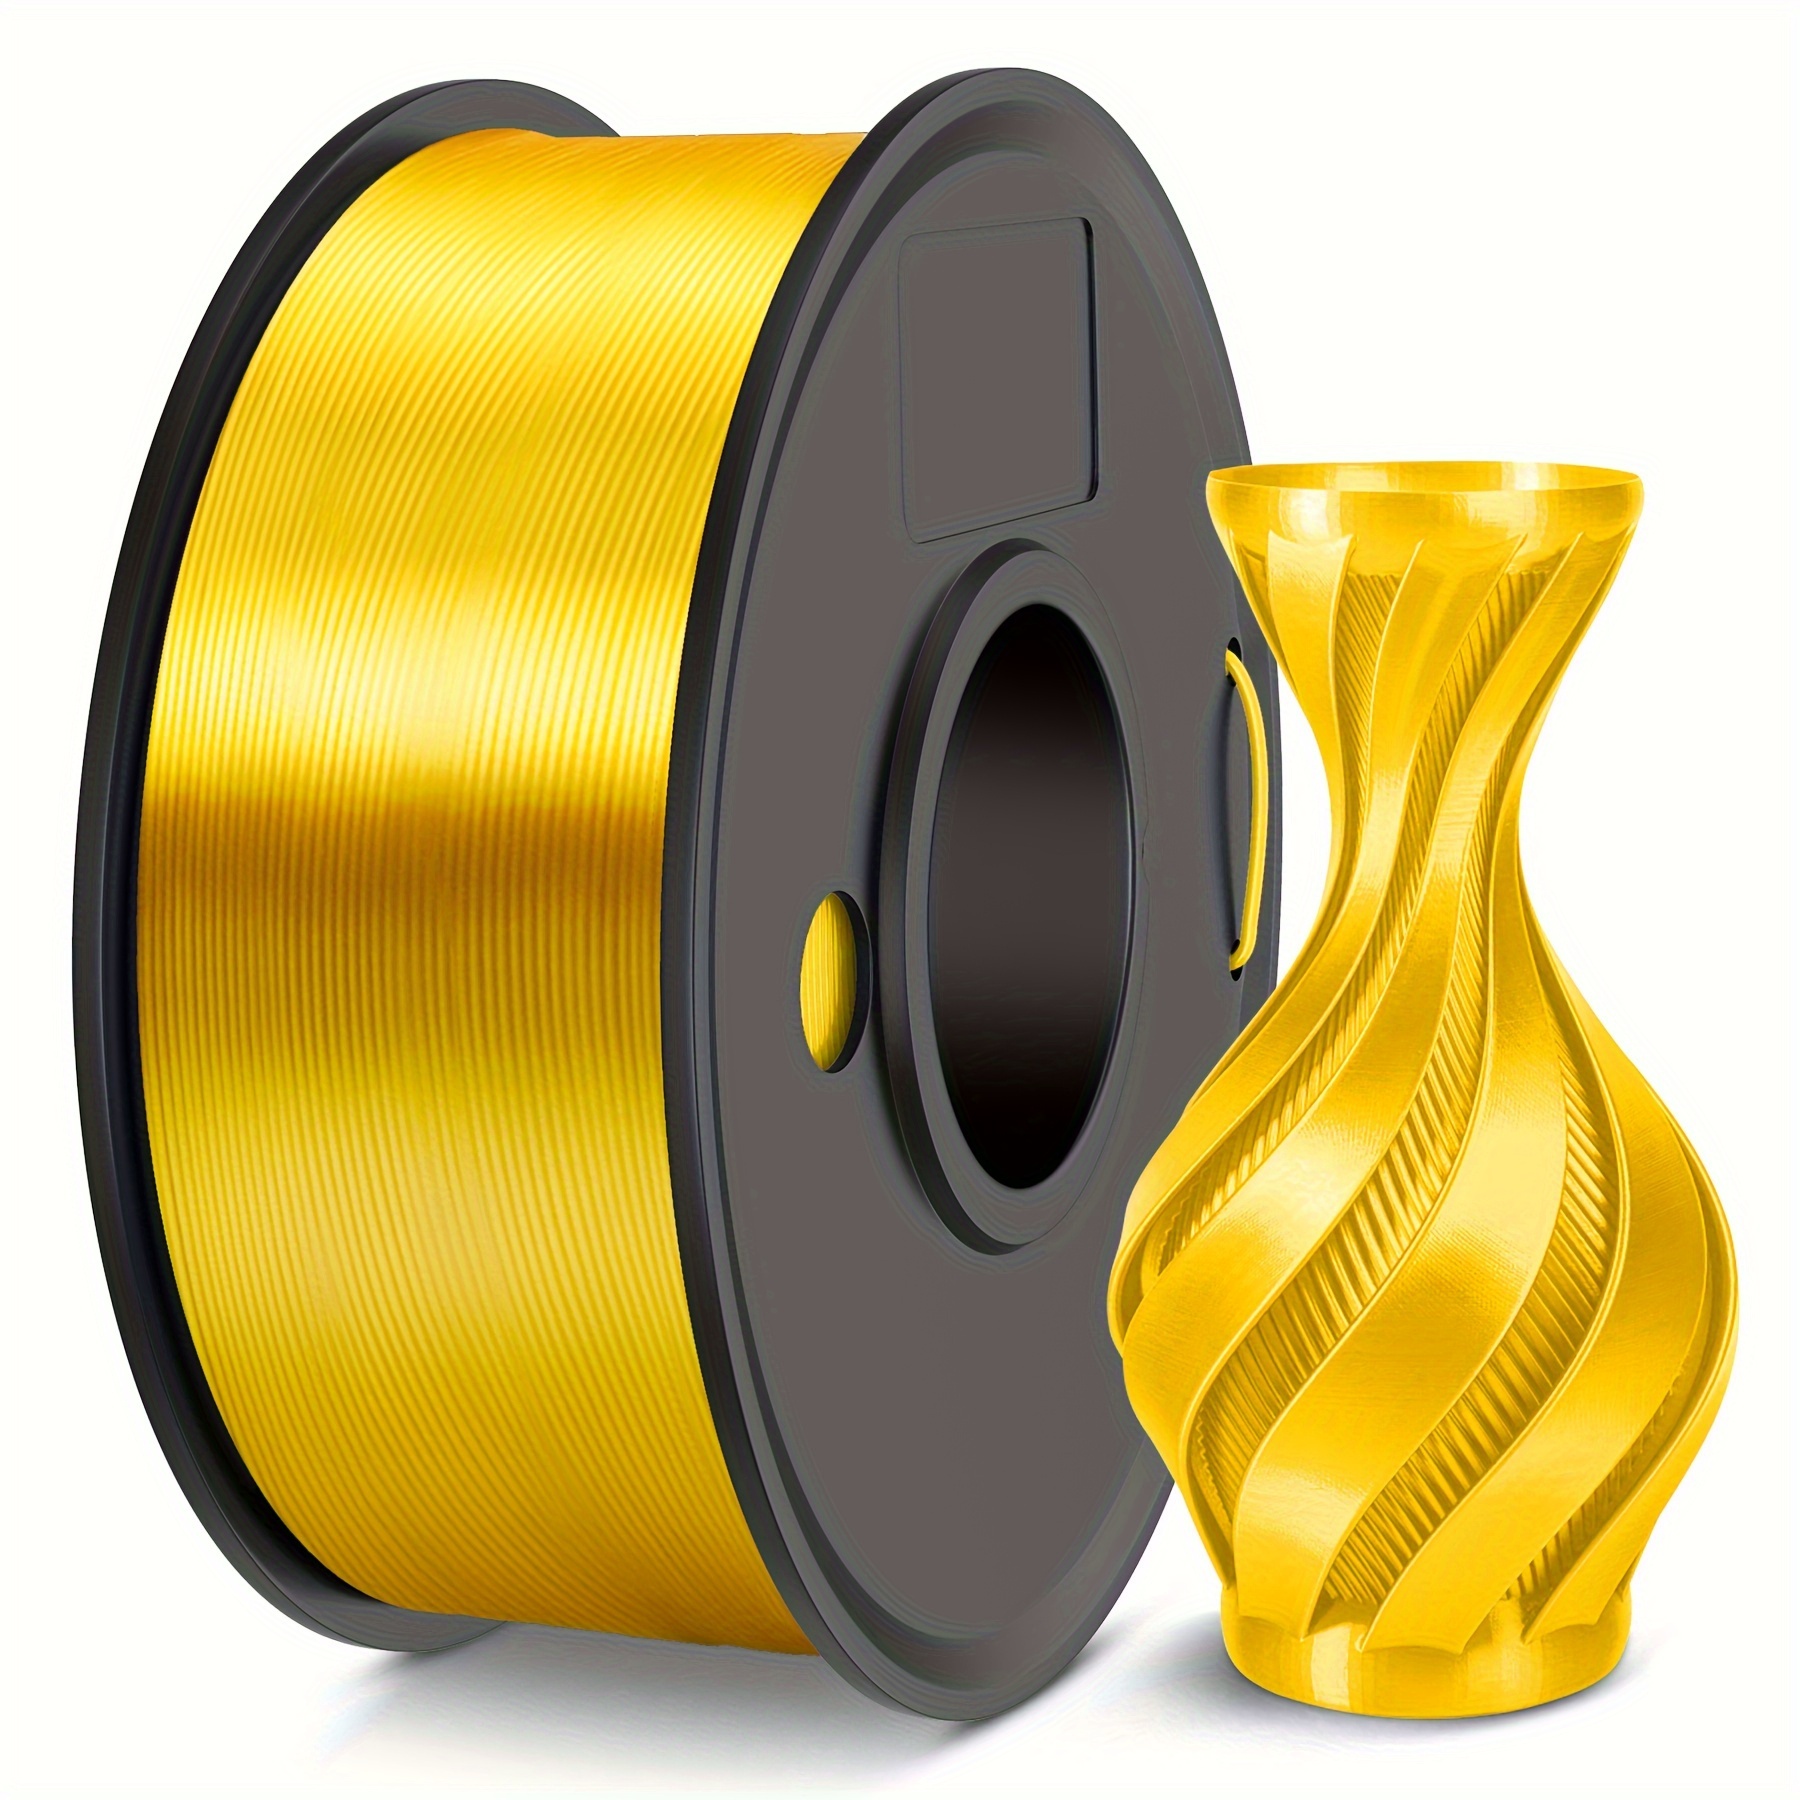 

3d Printer Silk Filament, Sunlu Shiny Silk Pla, Filament, Dimensional Accuracy +/- 1.75mm, +/- 0.02mm, 0.25kg, Smooth Silky Surface, Great Easy To Print For 3d Printers